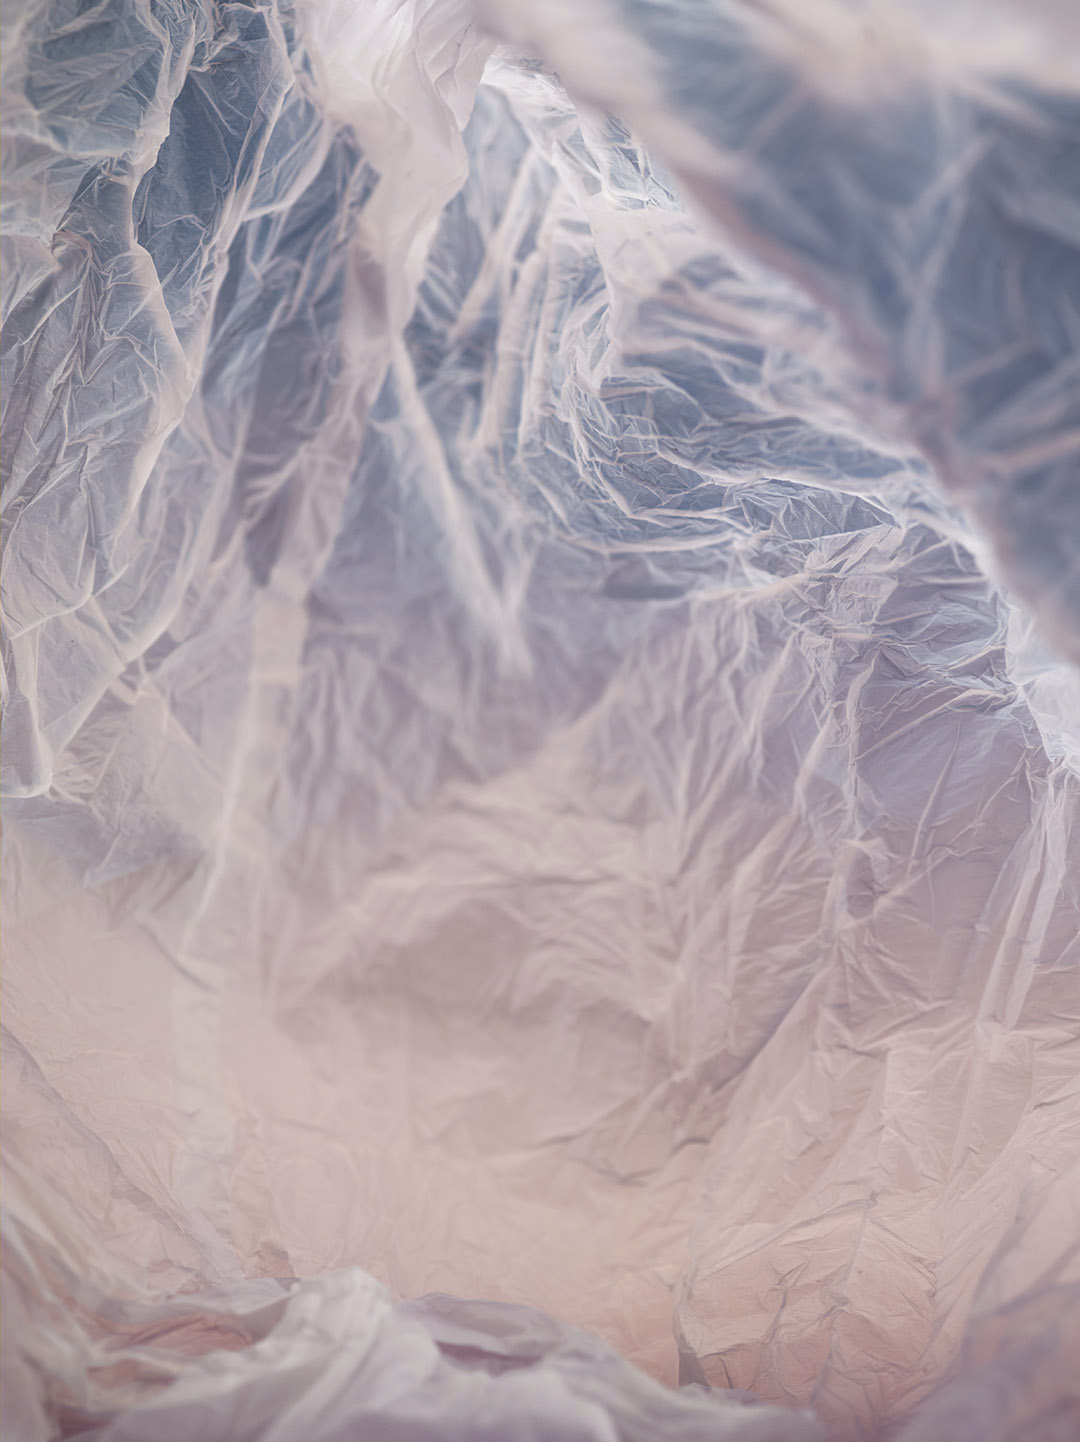 These Magical Landscapes Are Actually Photos Of Plastic Bags